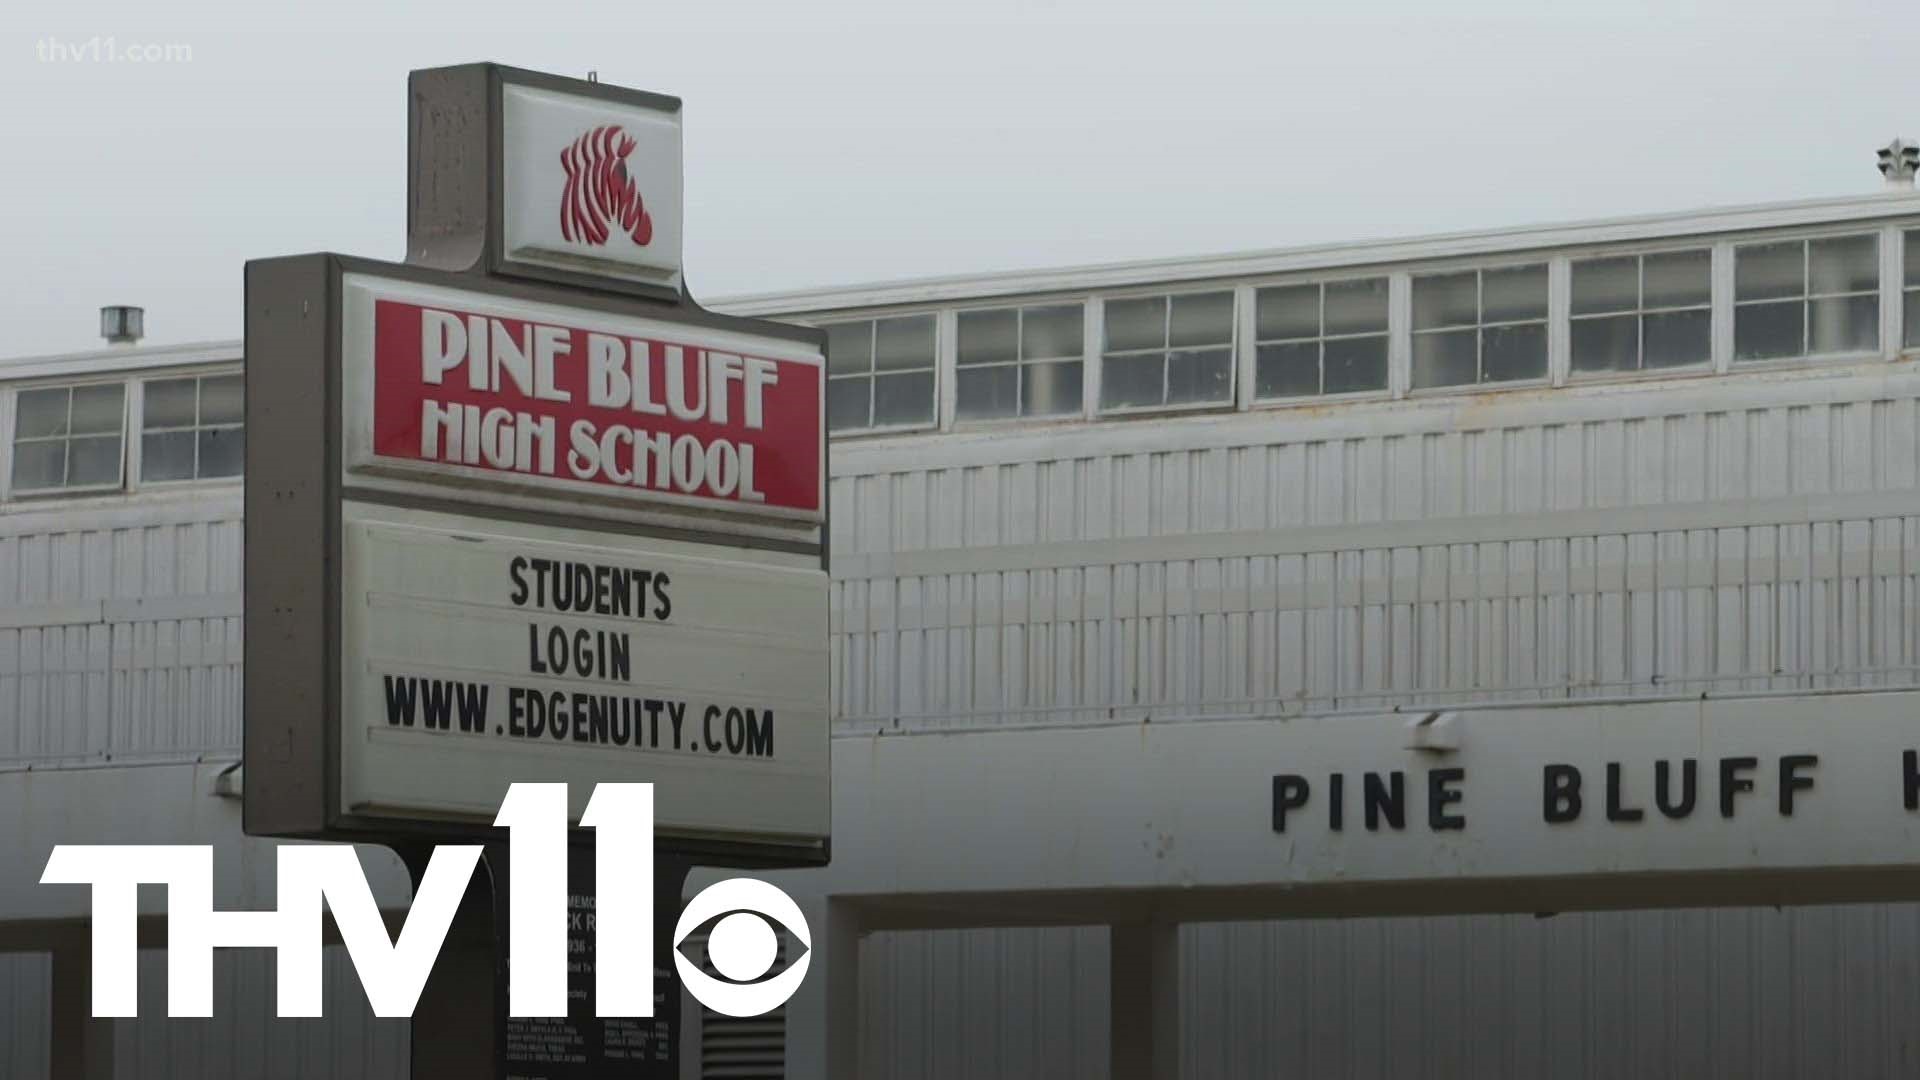 Last week, Pine Bluff High School students protested after gun violence took the life of a classmate. That protest has since reached adults outside of the school.